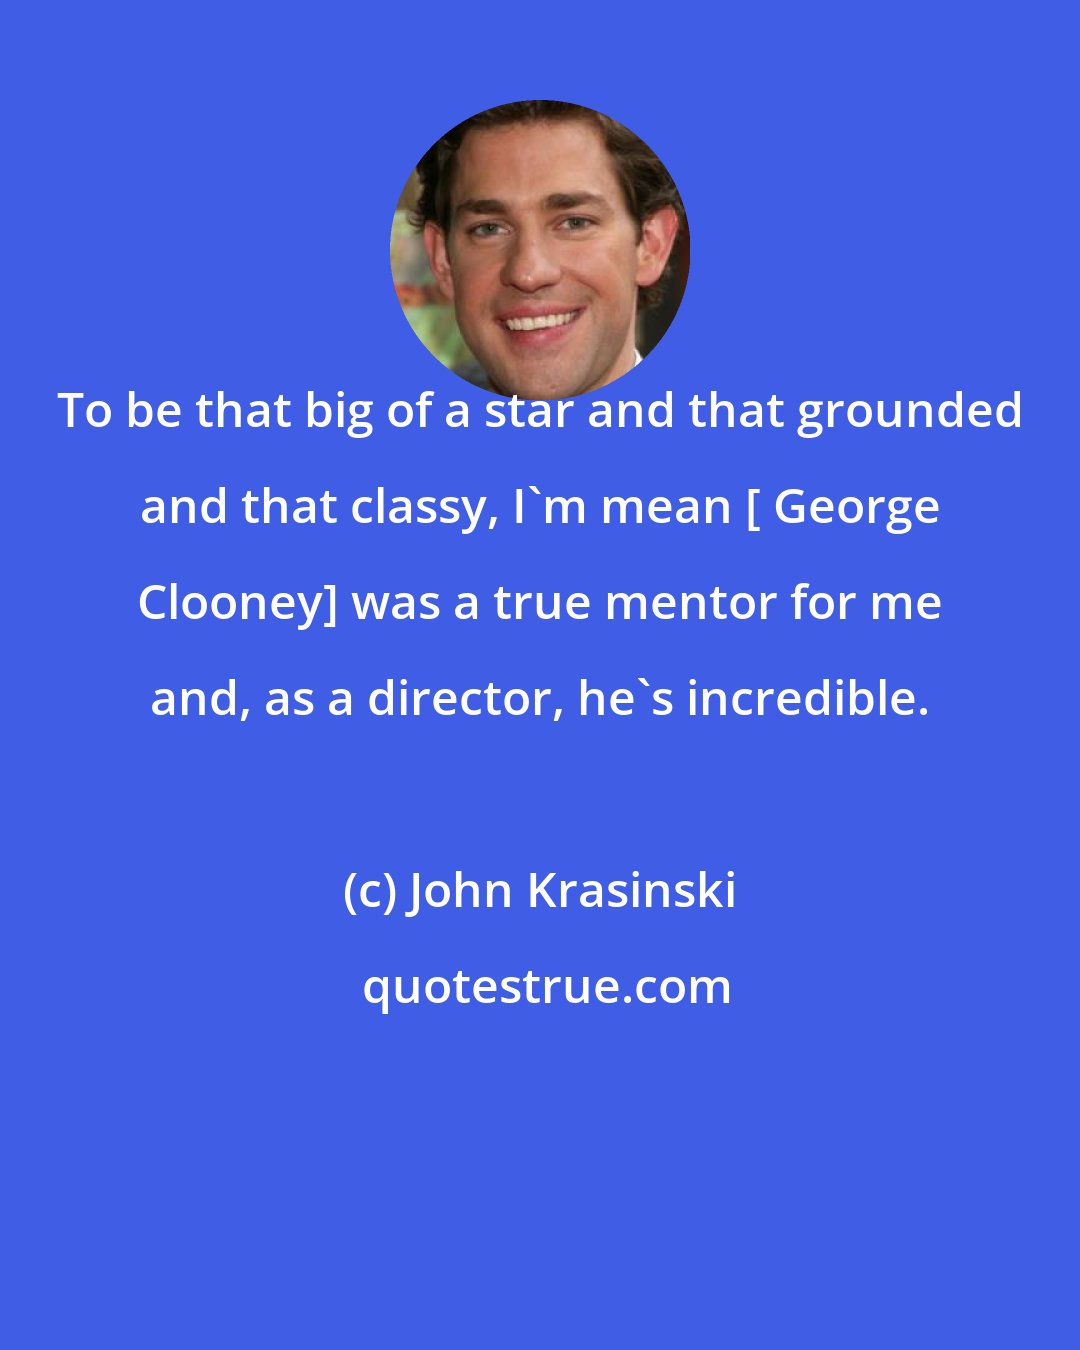 John Krasinski: To be that big of a star and that grounded and that classy, I'm mean [ George Clooney] was a true mentor for me and, as a director, he's incredible.